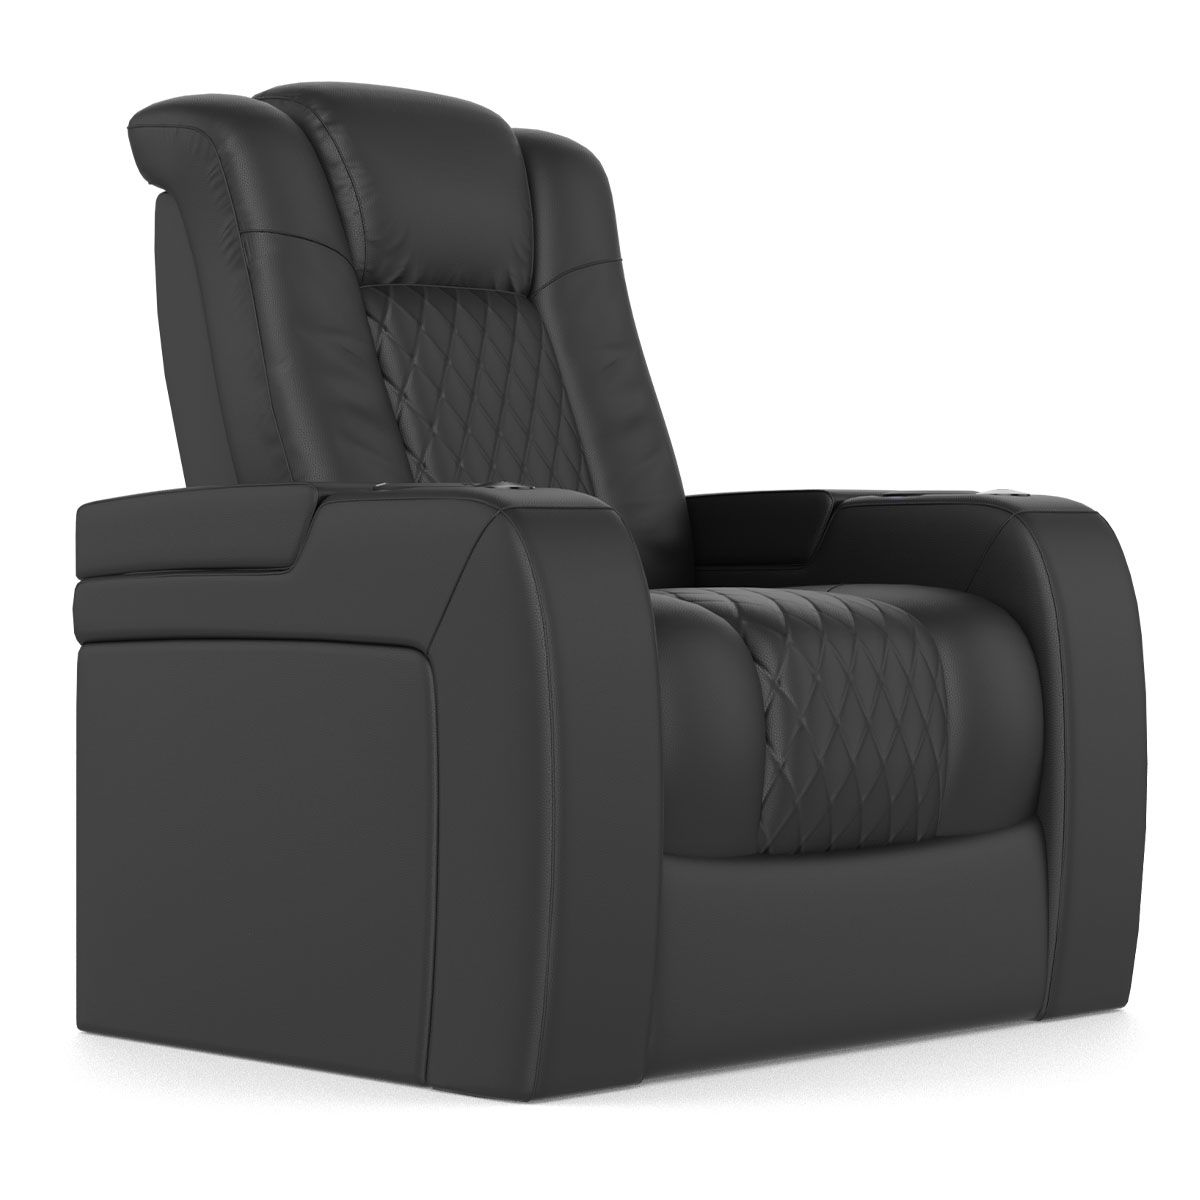 Audio Advice Revelation Home Theater Seating - angled front view of 2 arm chair